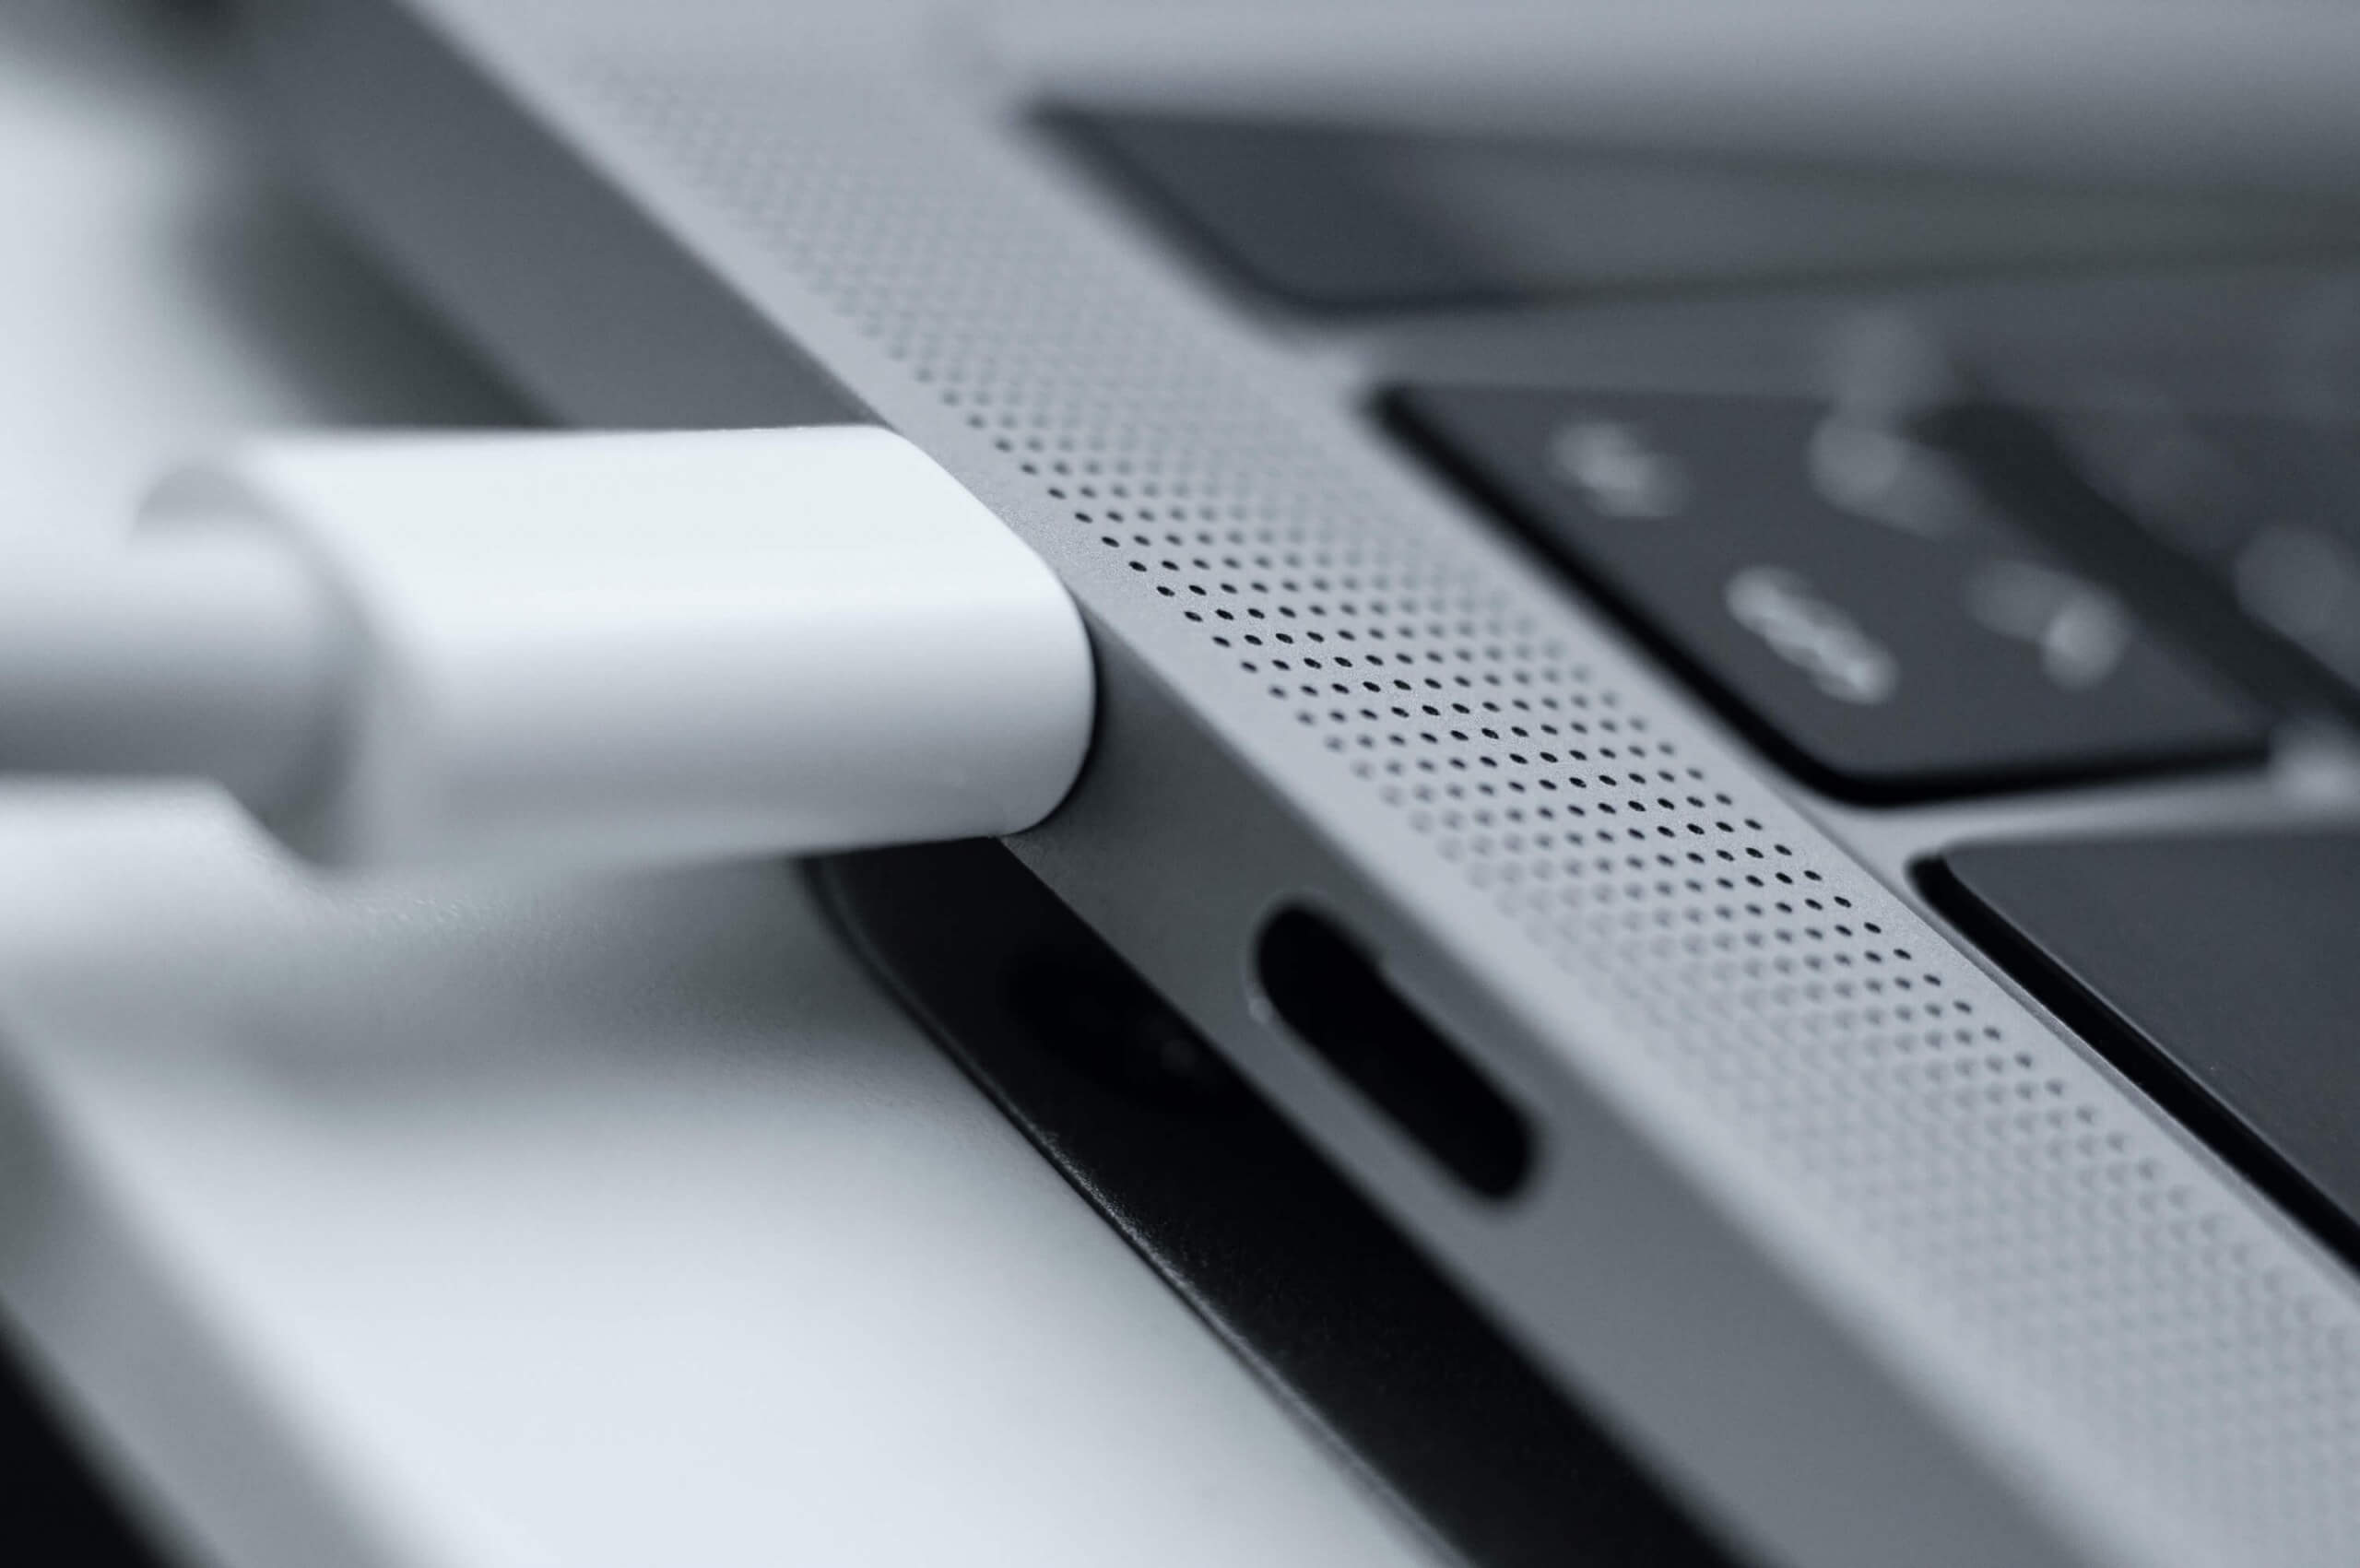 Charging a MacBook on the wrong side can lead to noisy fans and lower performance